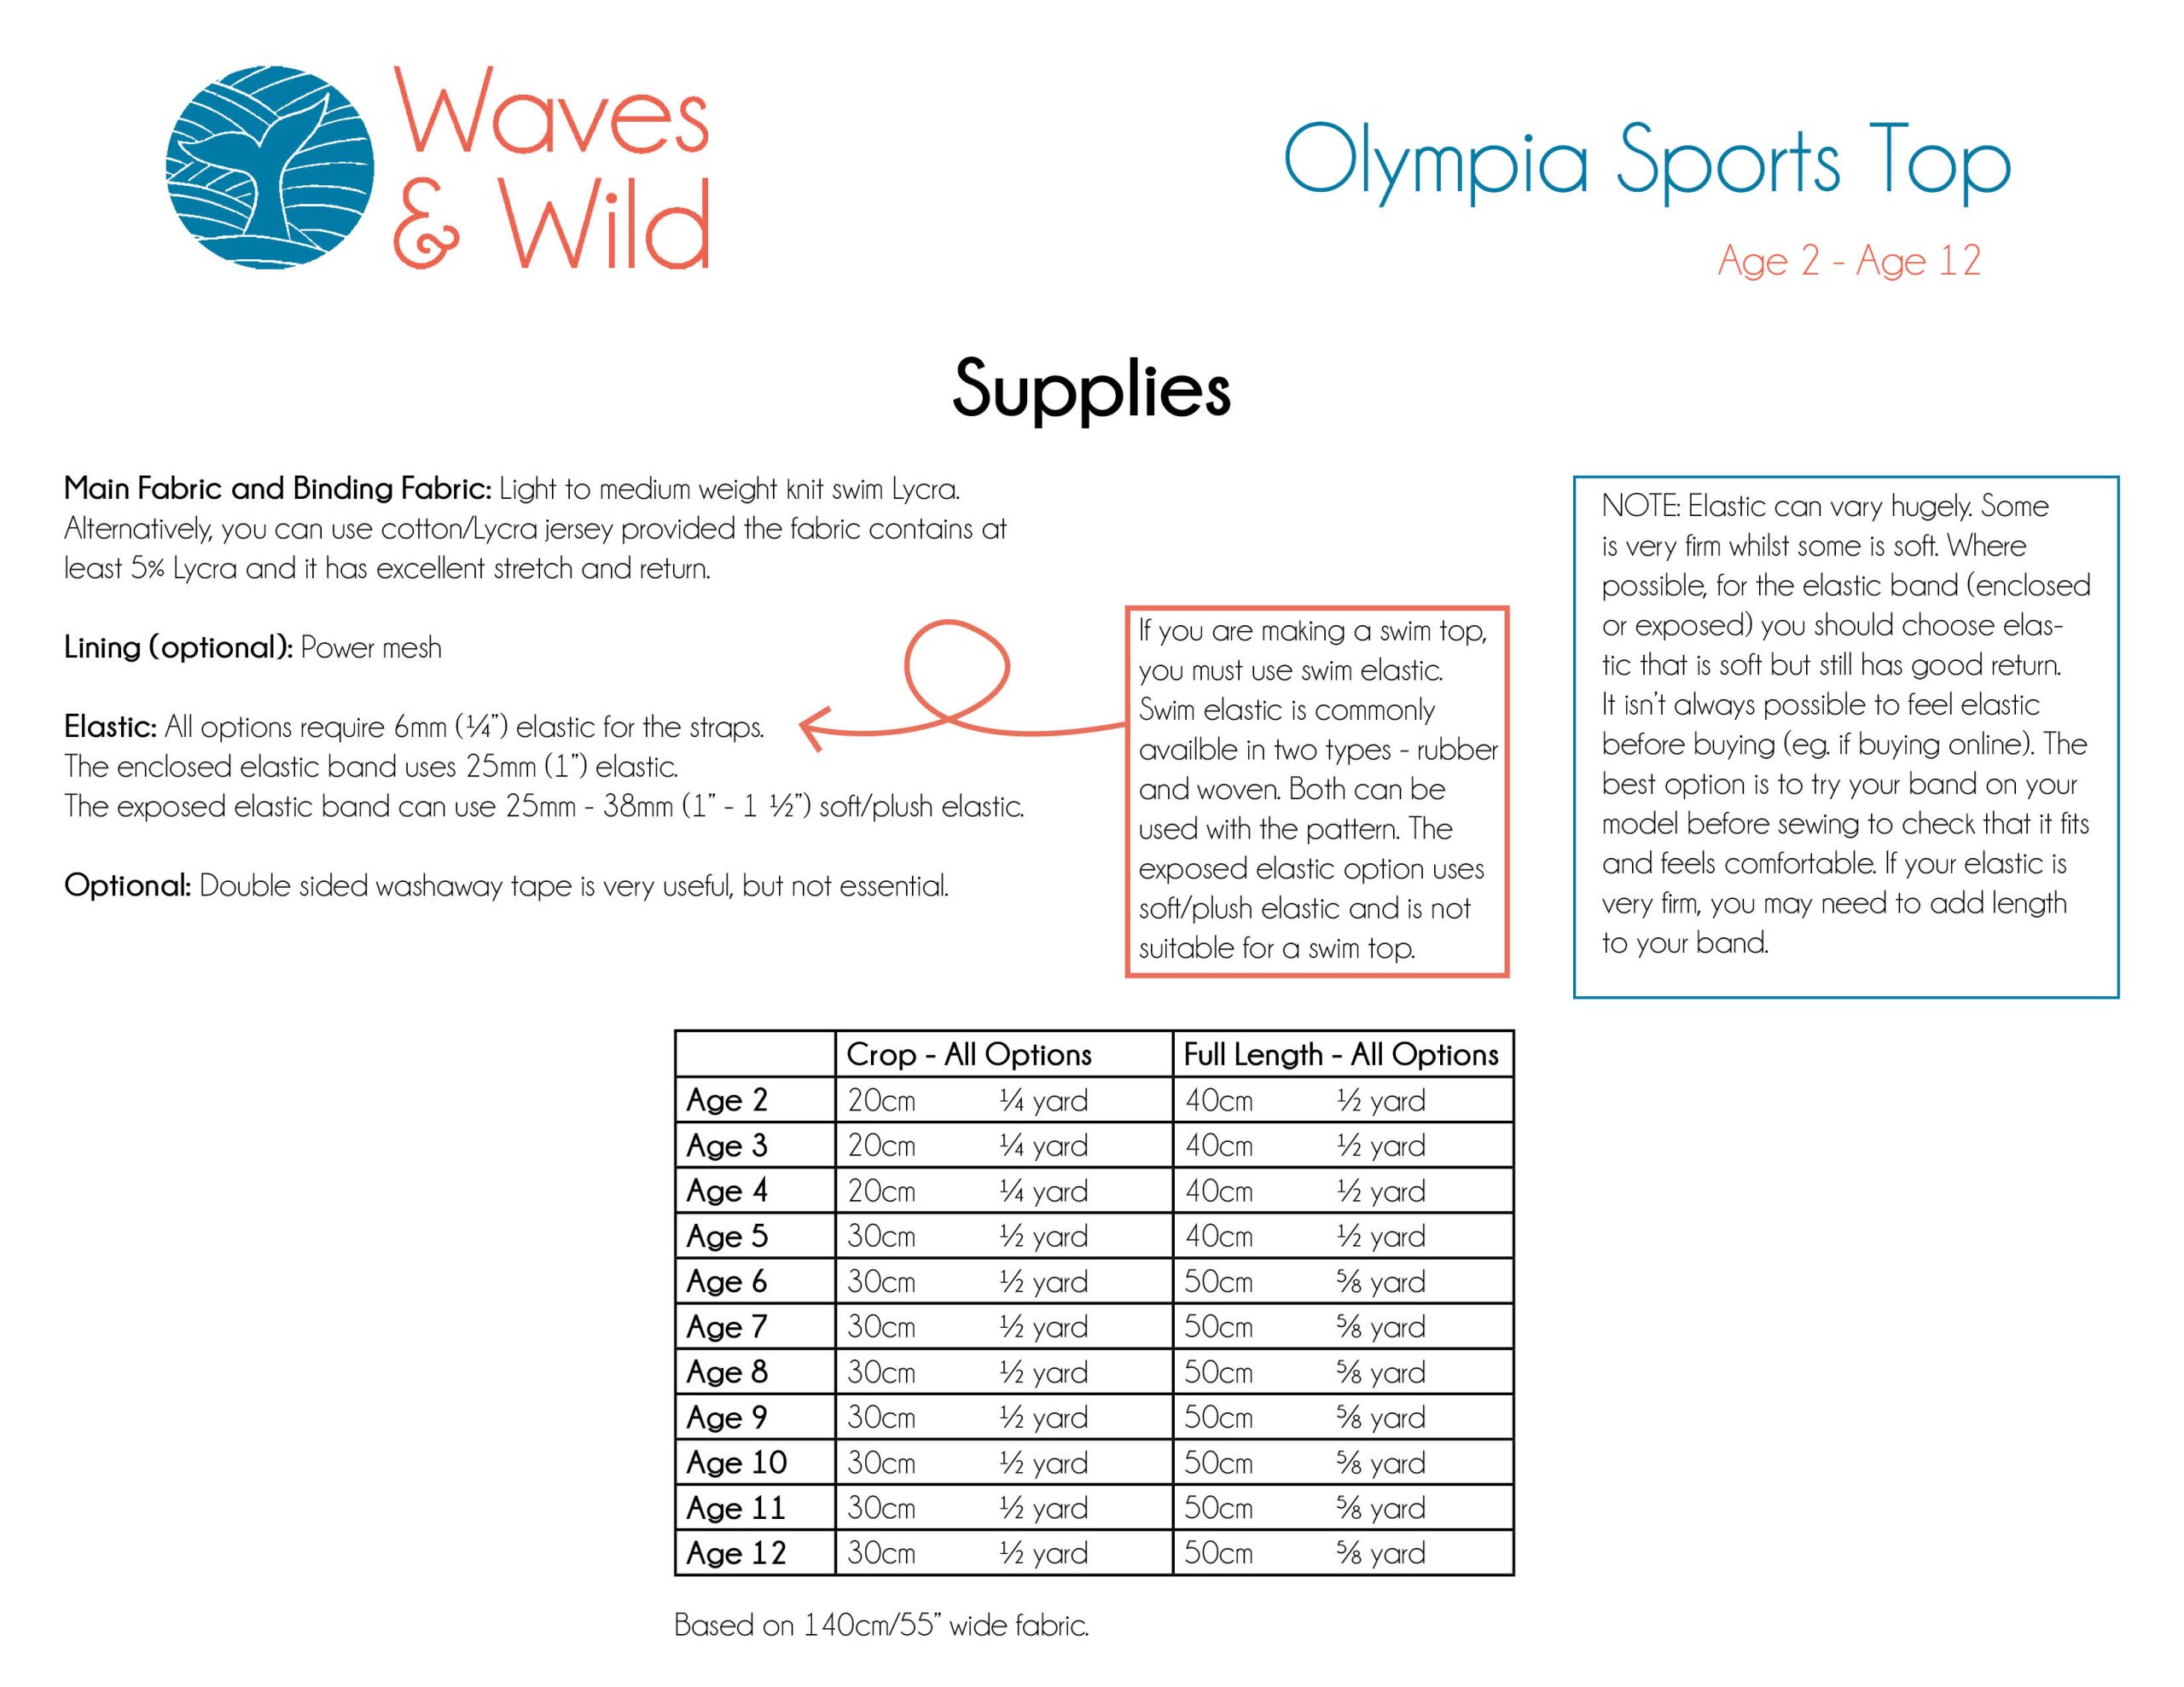 Waves & Wild Children's Olympia Sports Top